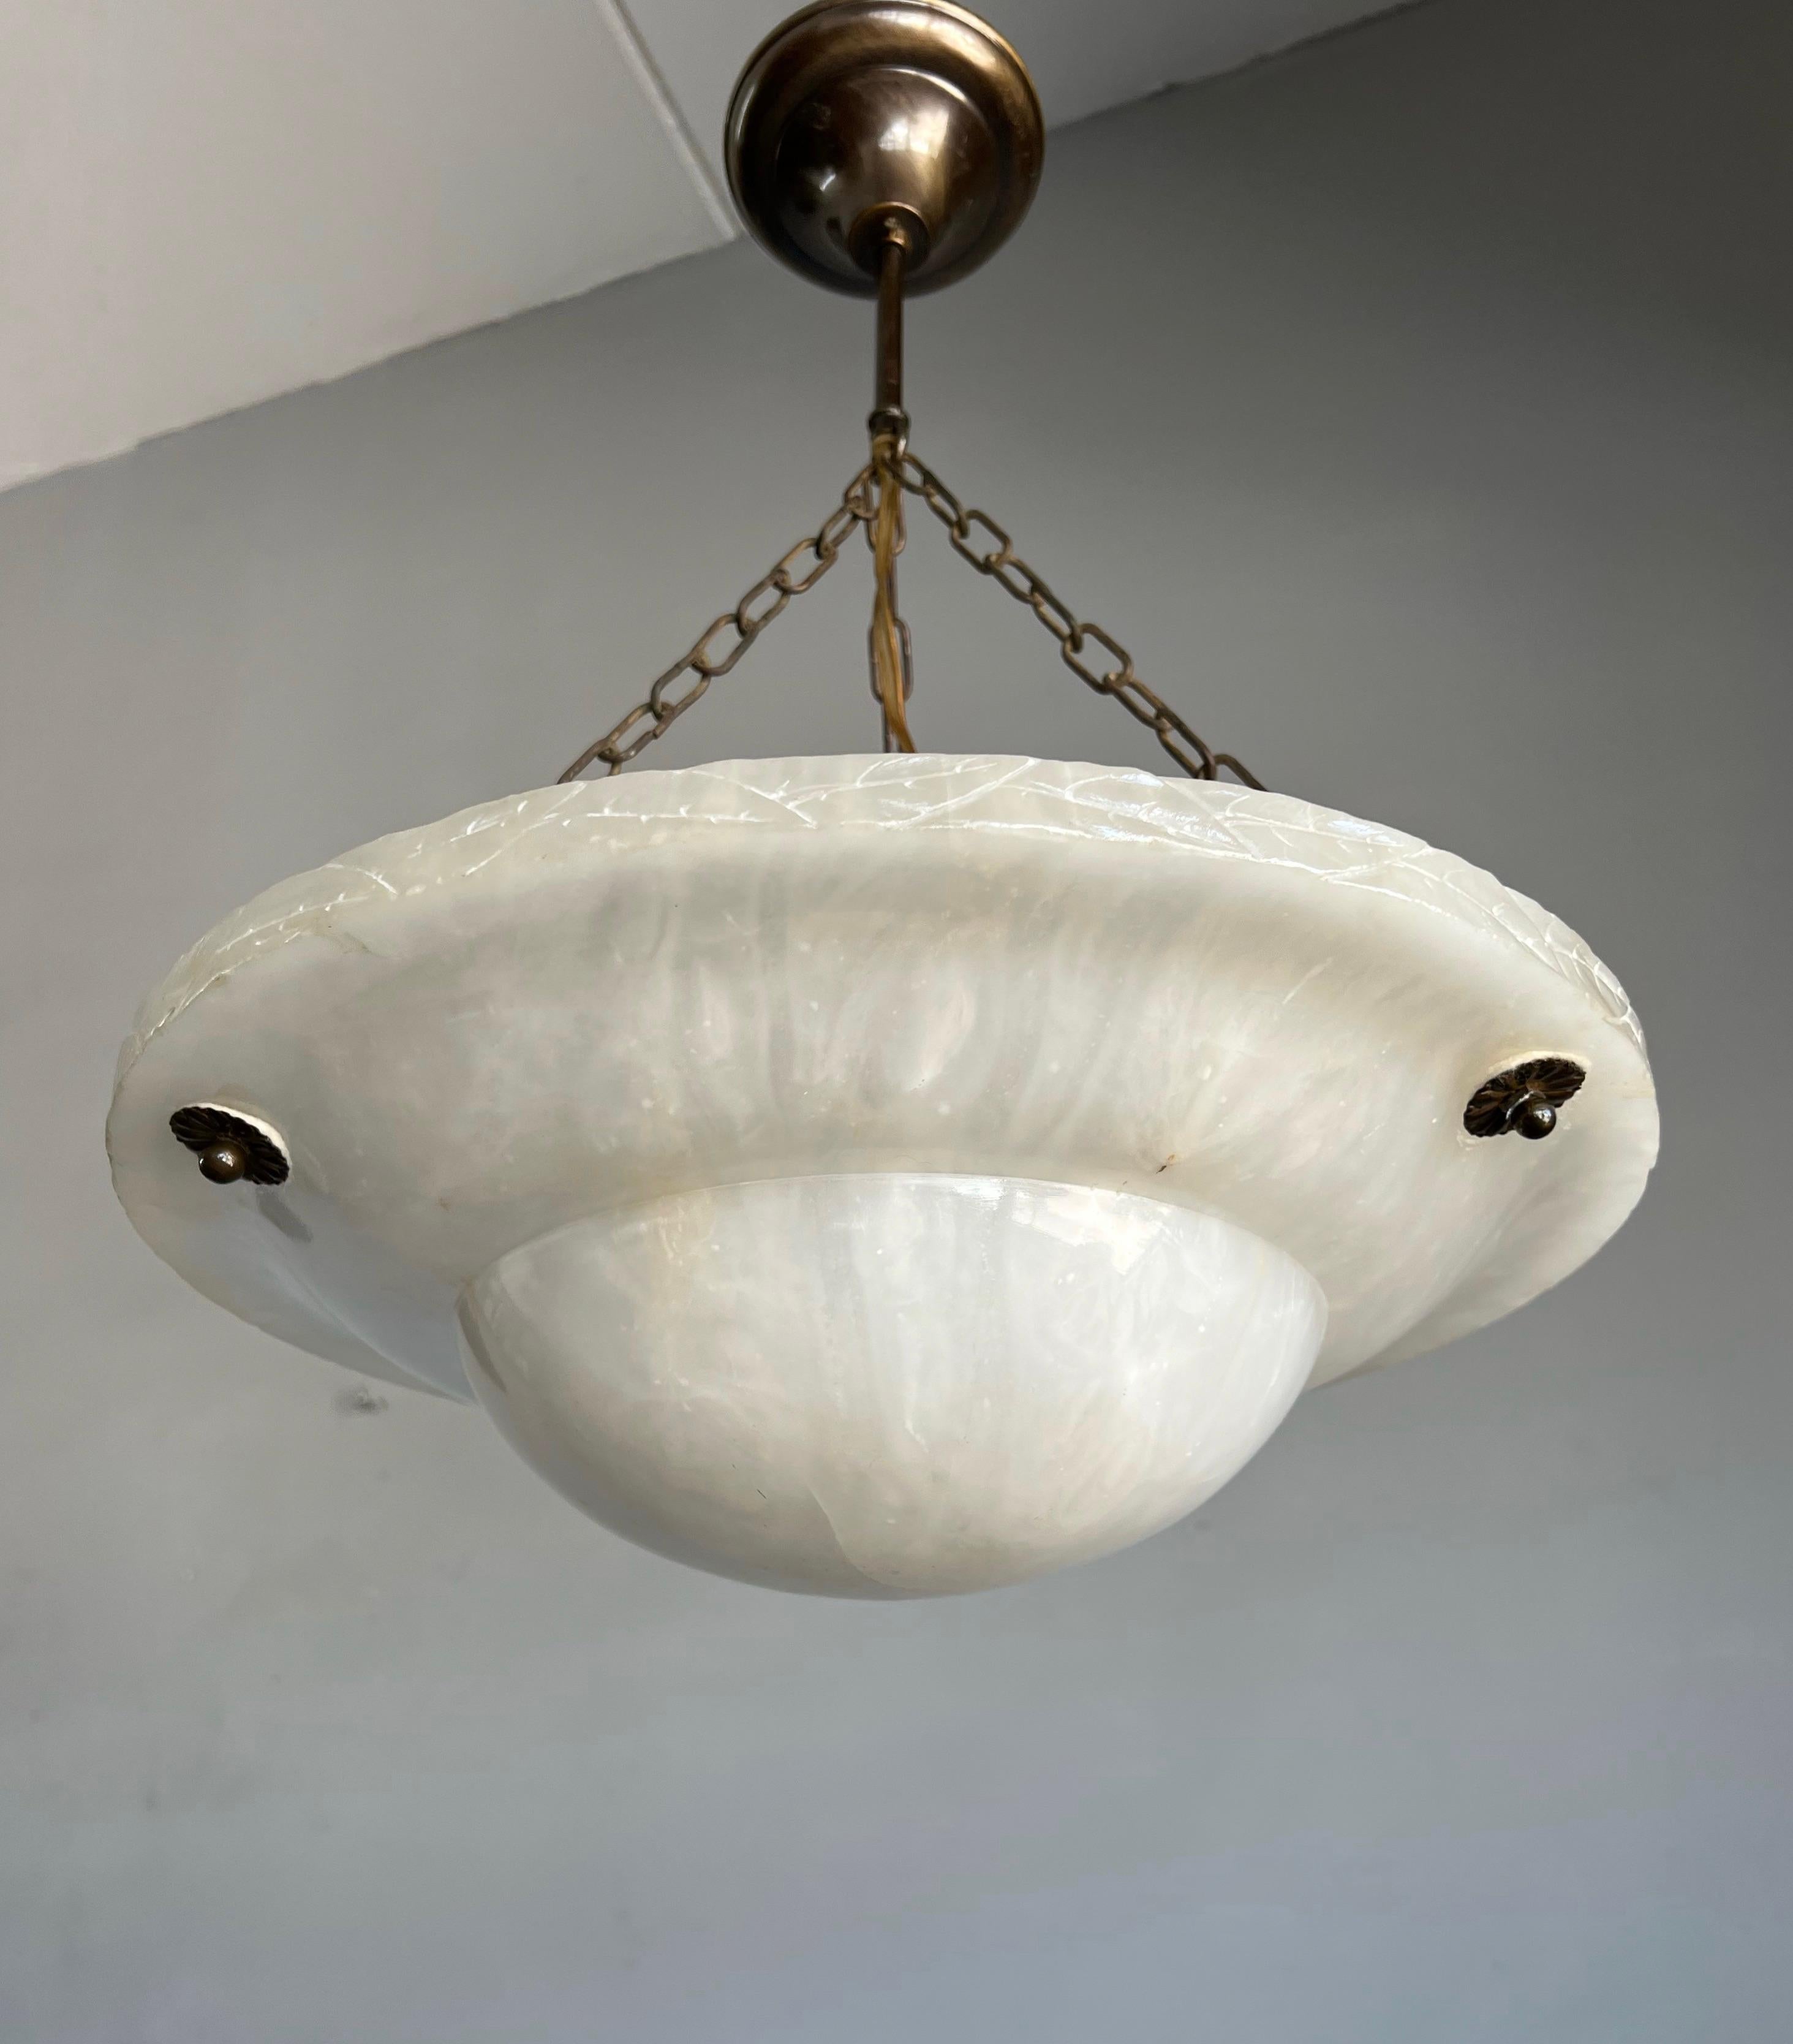 Good size and good condition alabaster pendant from the heydays of the Art Deco era.

This rare shape and ideal size Art Deco light fixture comes with a stunning and mint condition, hand carved and polished alabaster shade. This practical size and